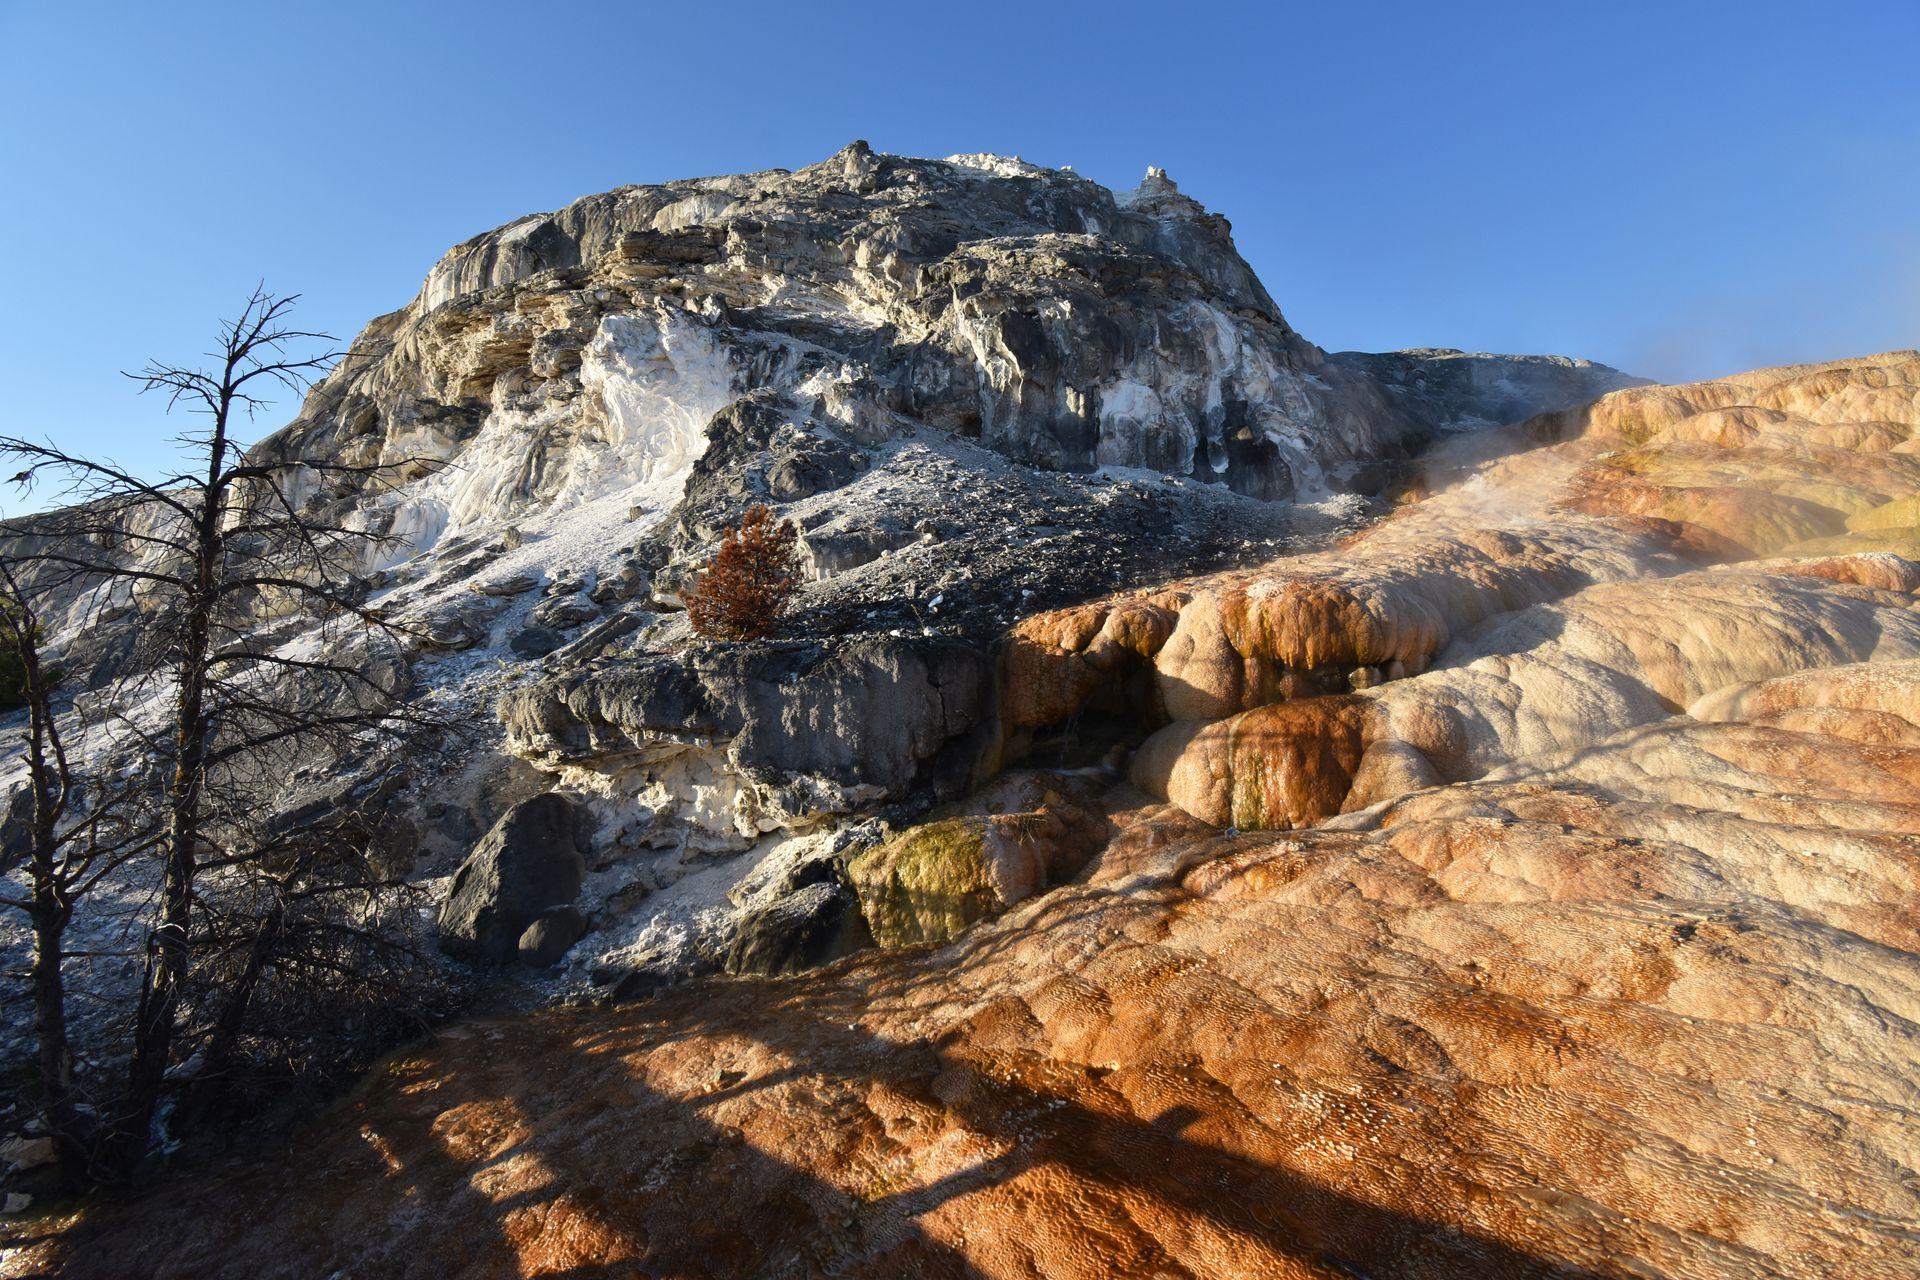 A formation of orange and white rocks and sulphur in the Mammoth Hot Springs area.